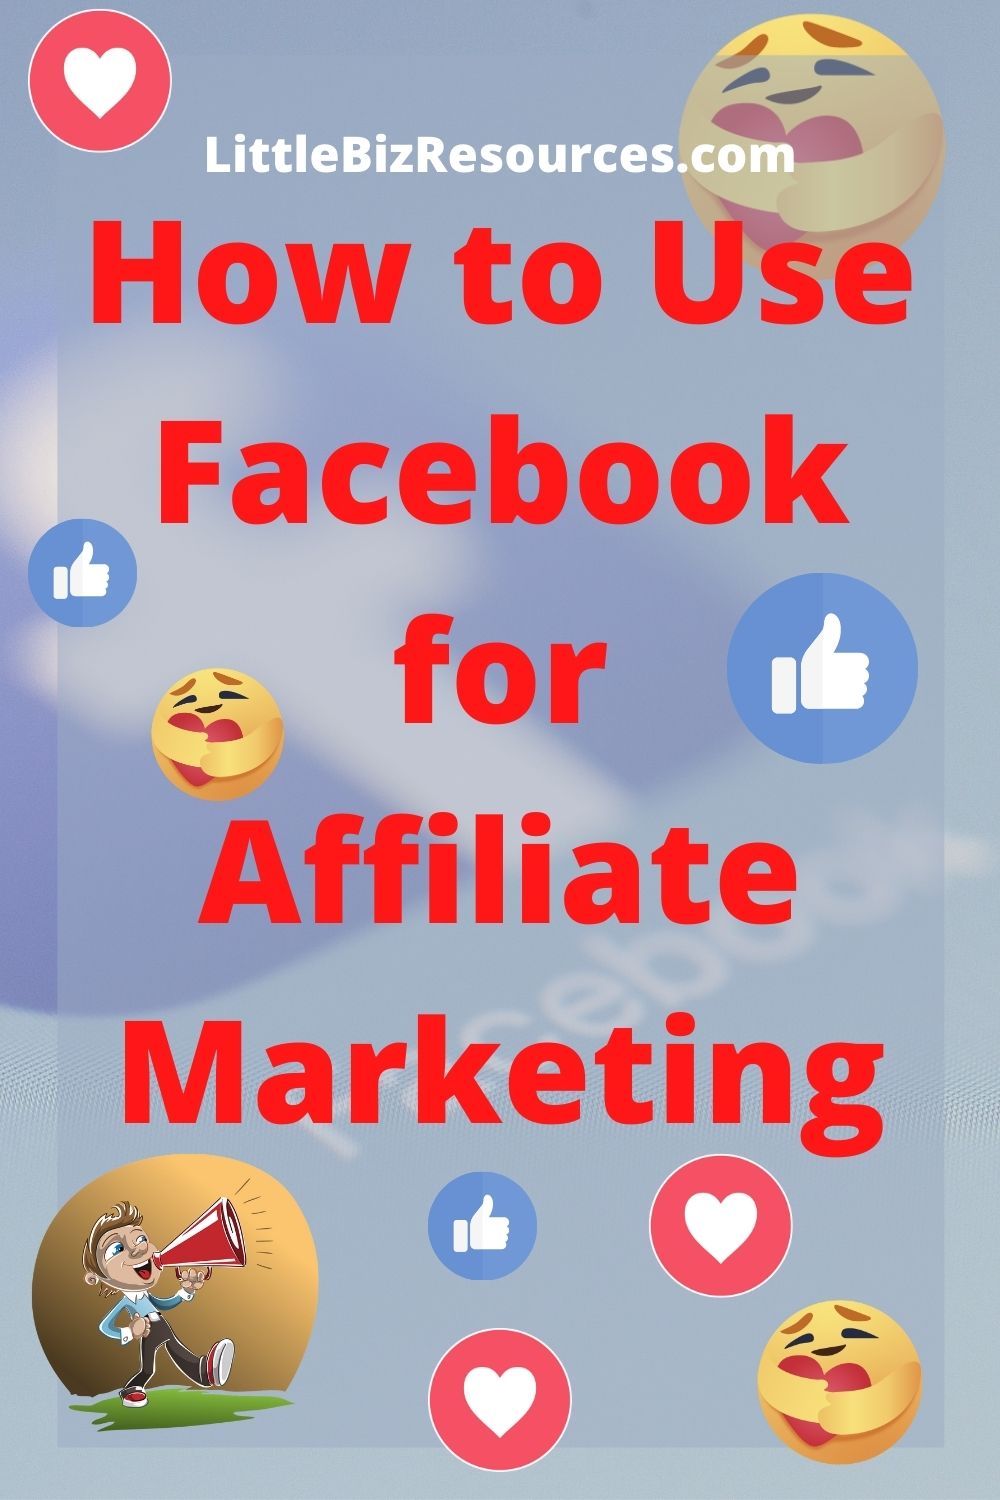 How to Use Facebook for Affiliate Marketing